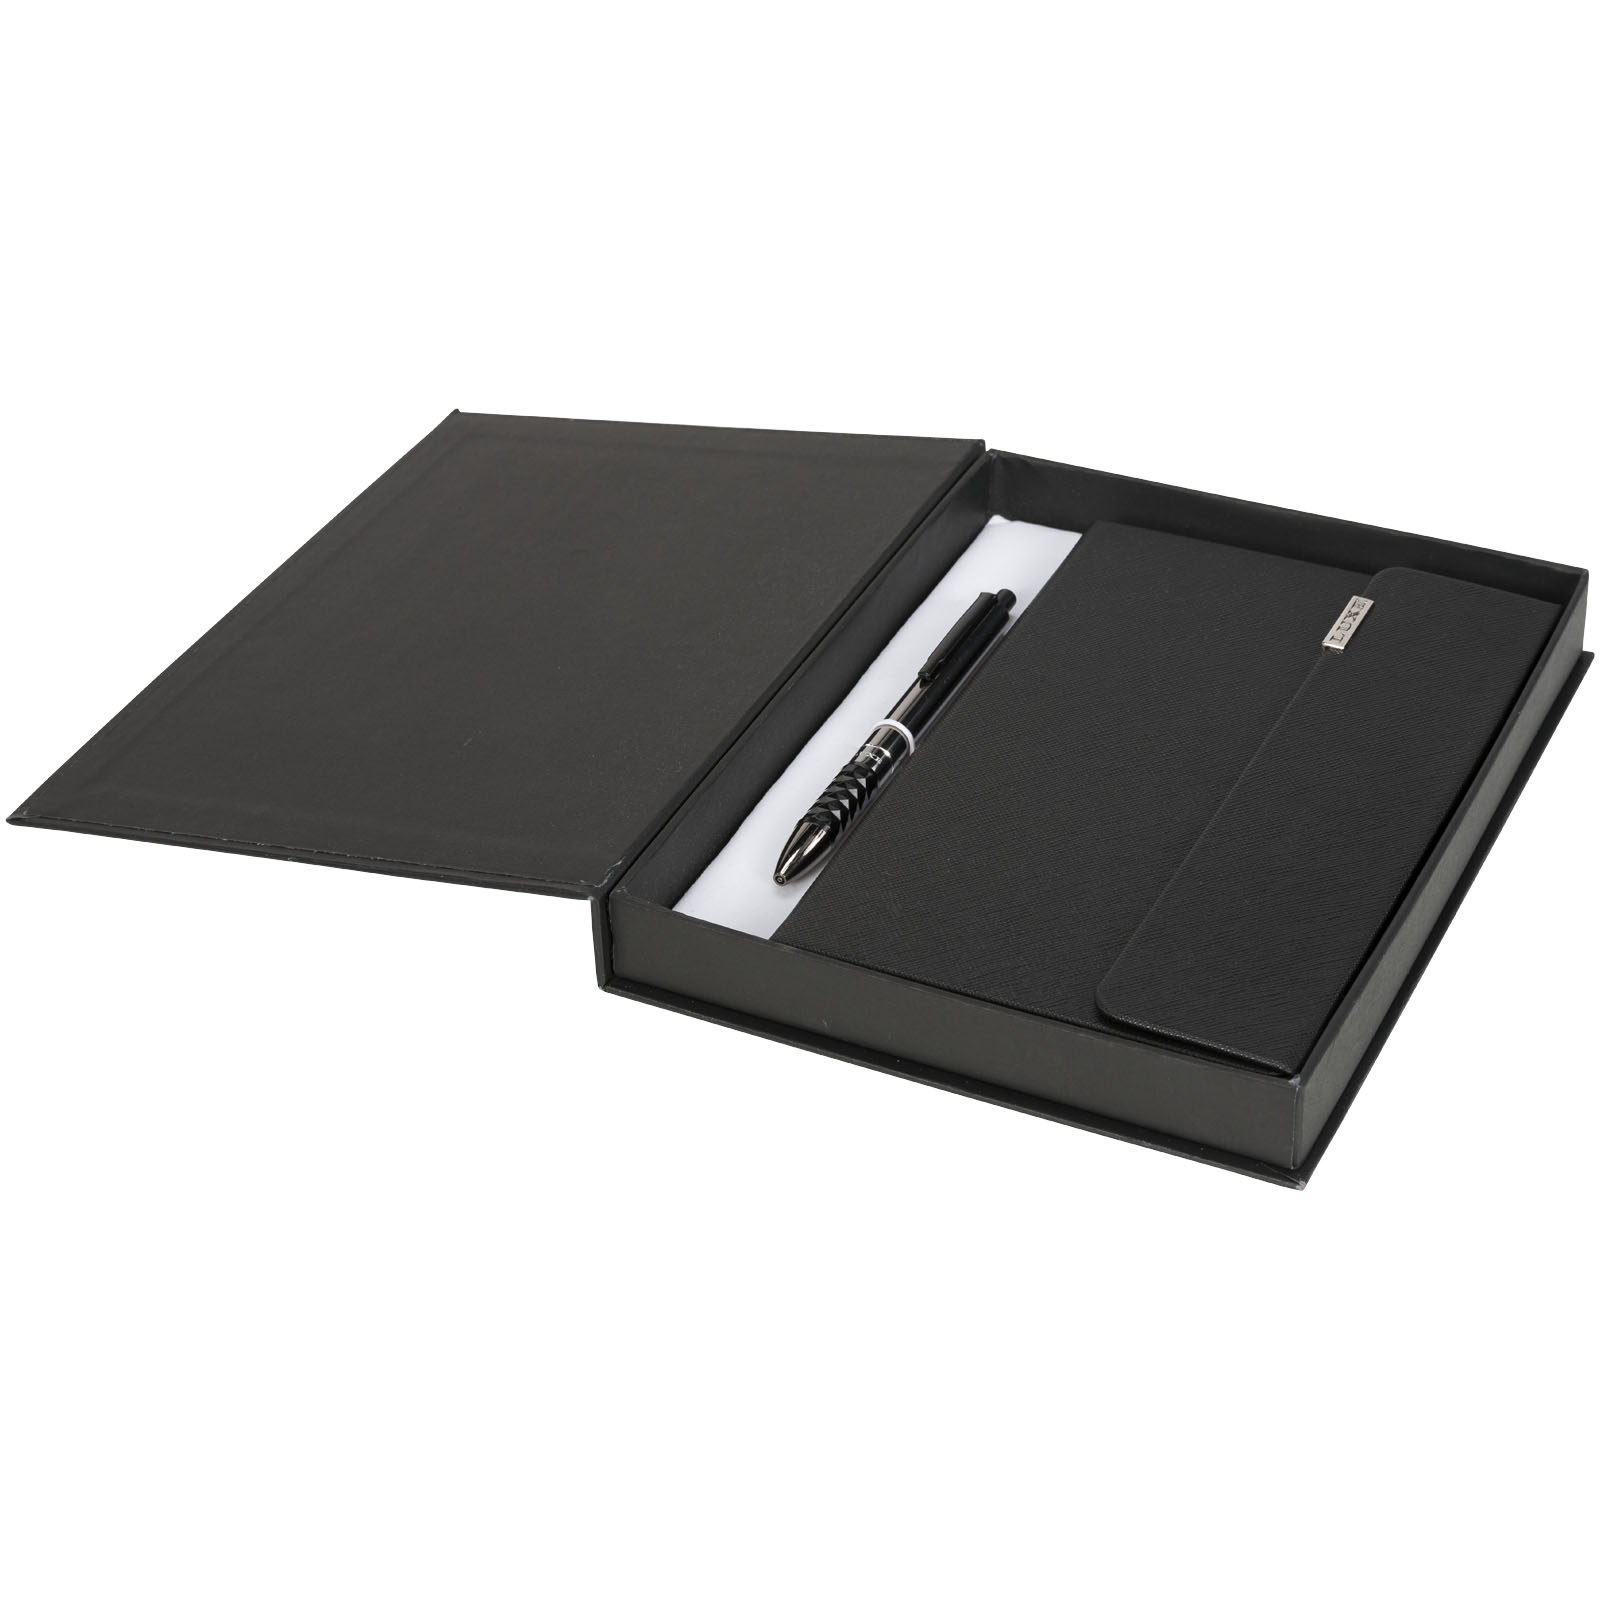 Advertising Gift sets - Tactical notebook gift set